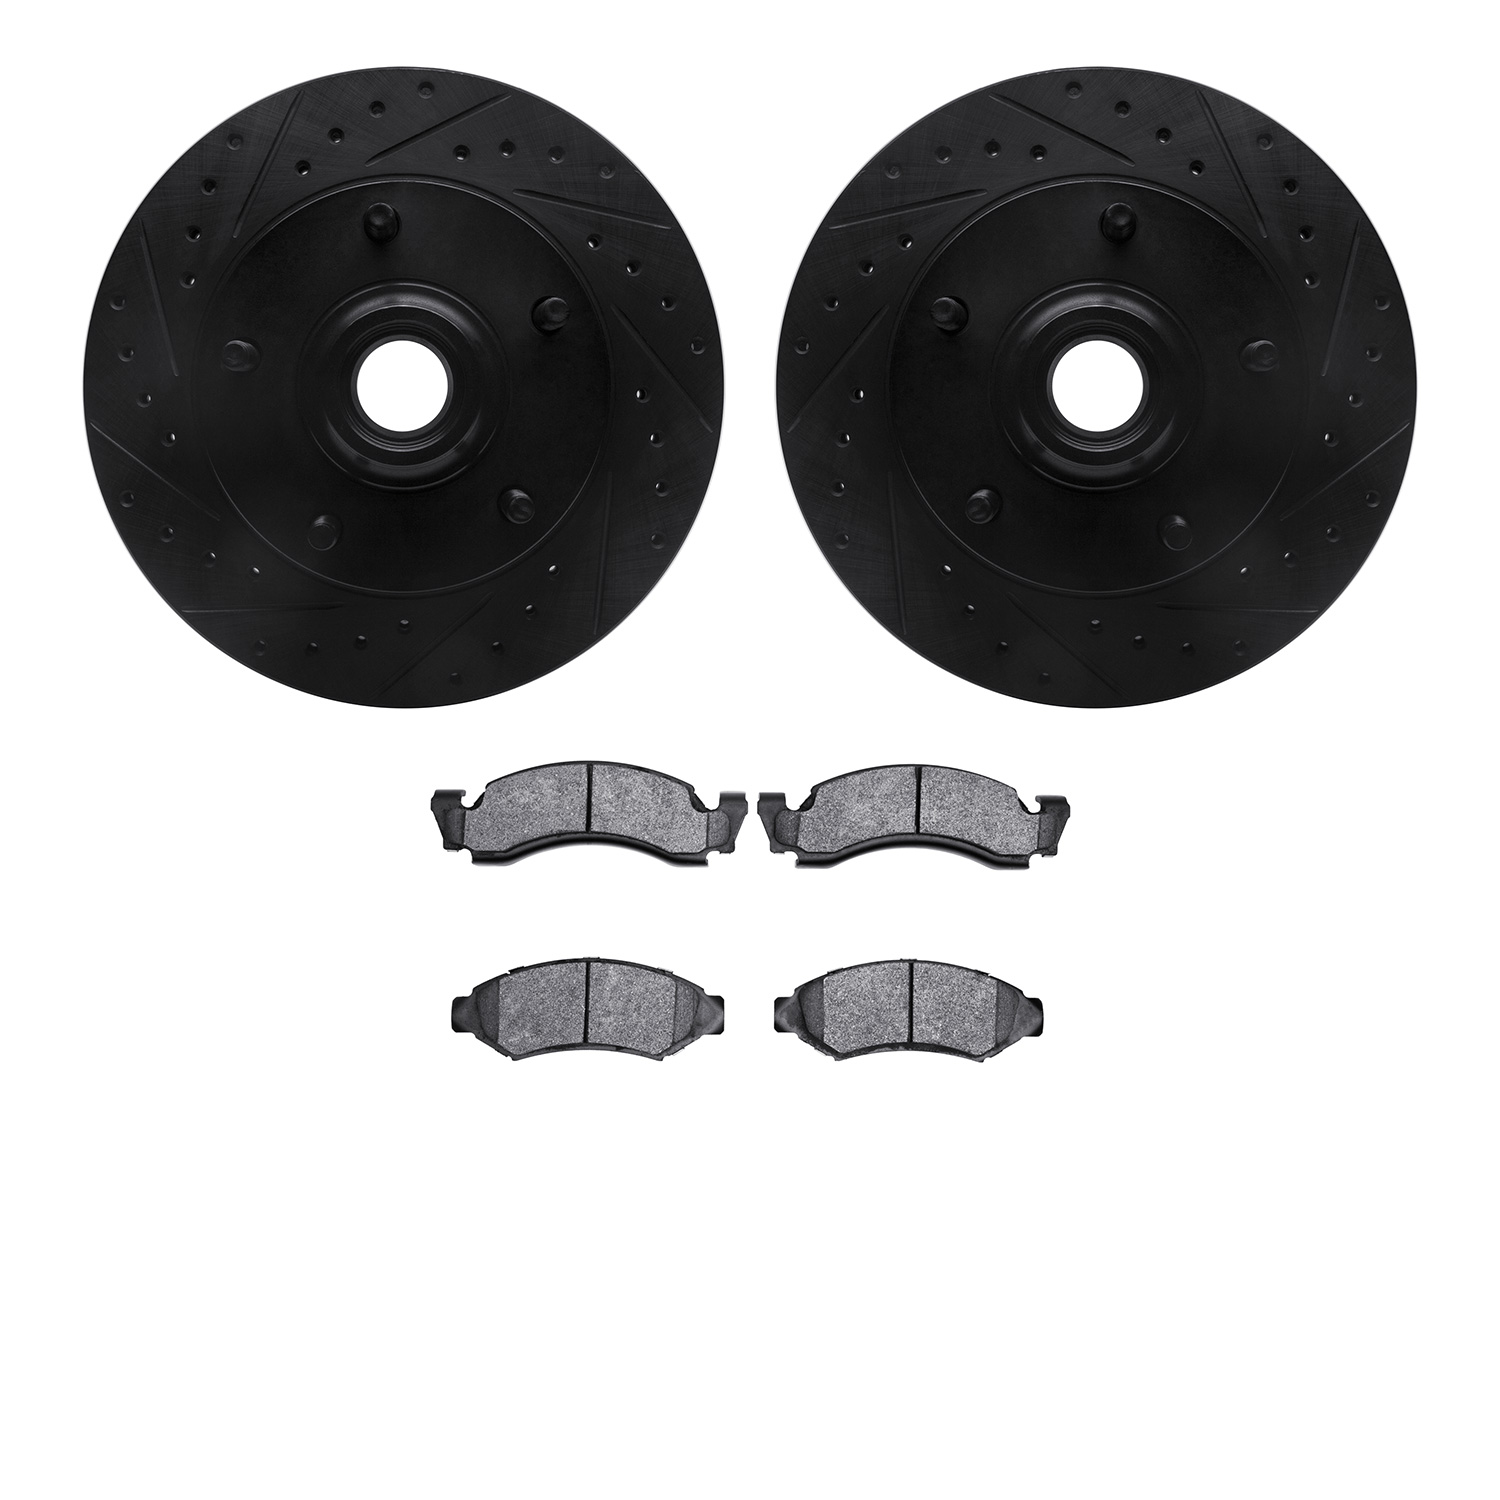 8402-54006 Drilled/Slotted Brake Rotors with Ultimate-Duty Brake Pads Kit [Black], 1986-1993 Ford/Lincoln/Mercury/Mazda, Positio